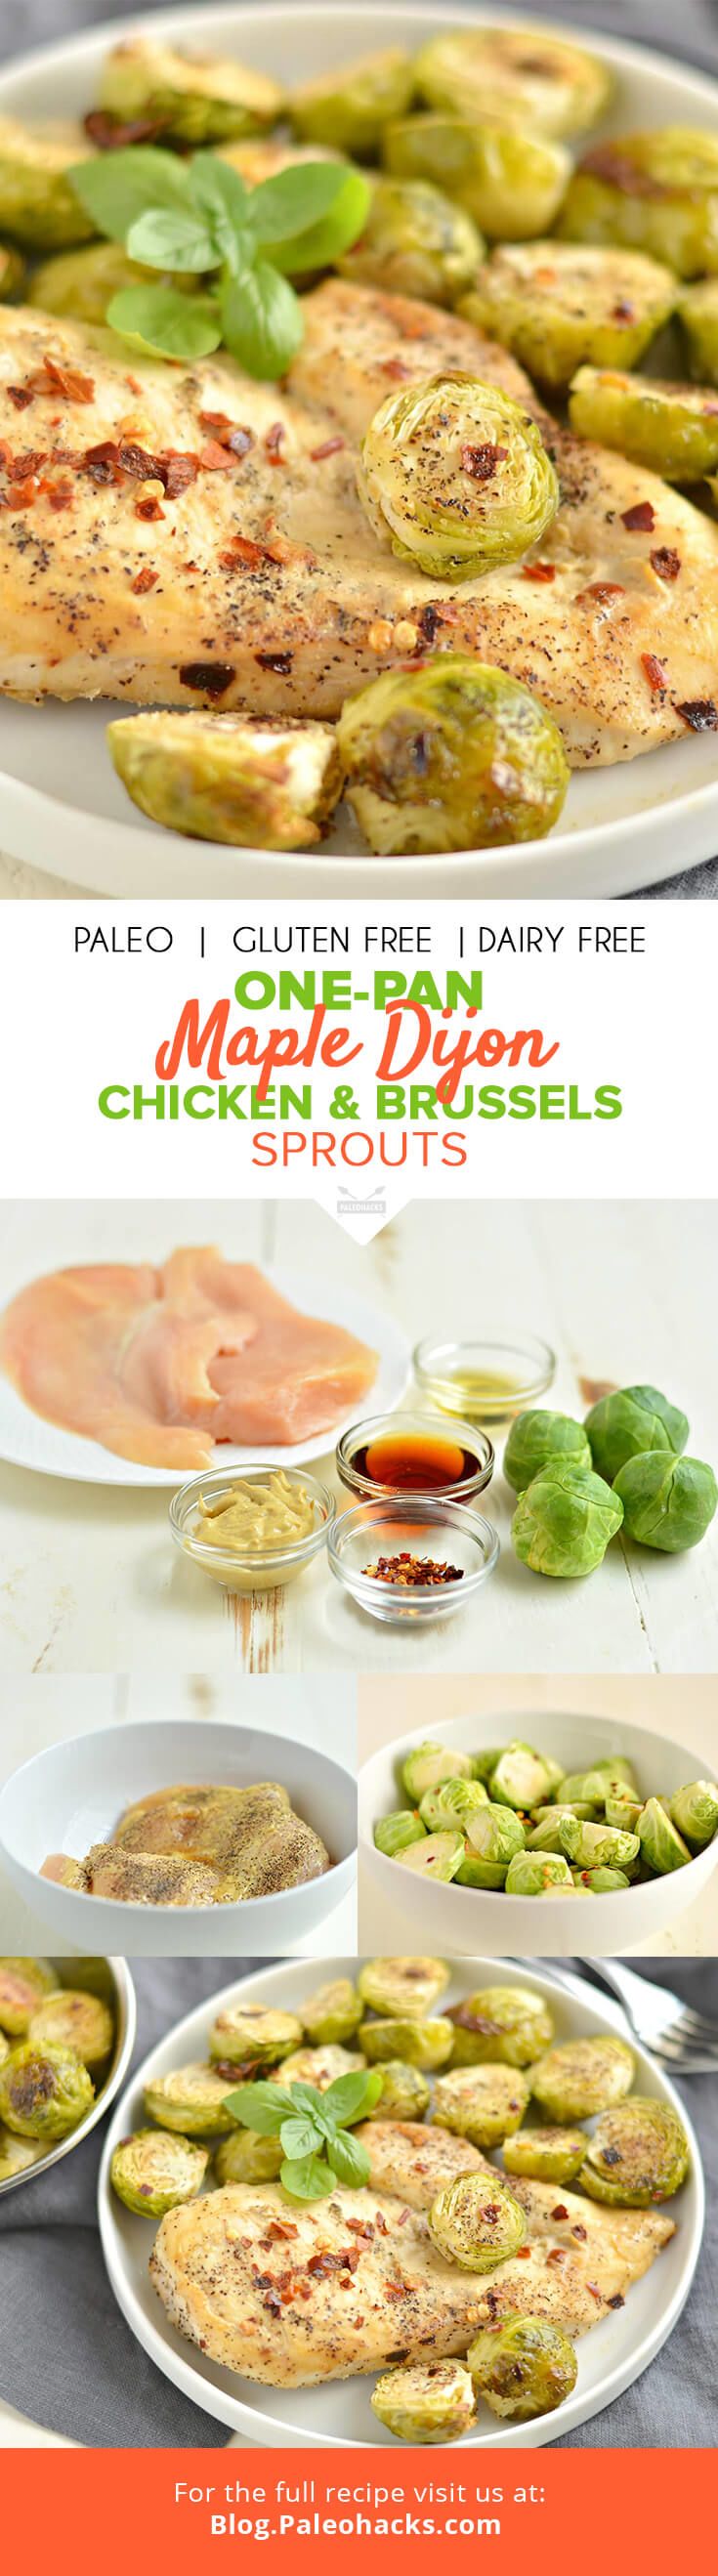 maple dijon chicken & brussels sprouts pin